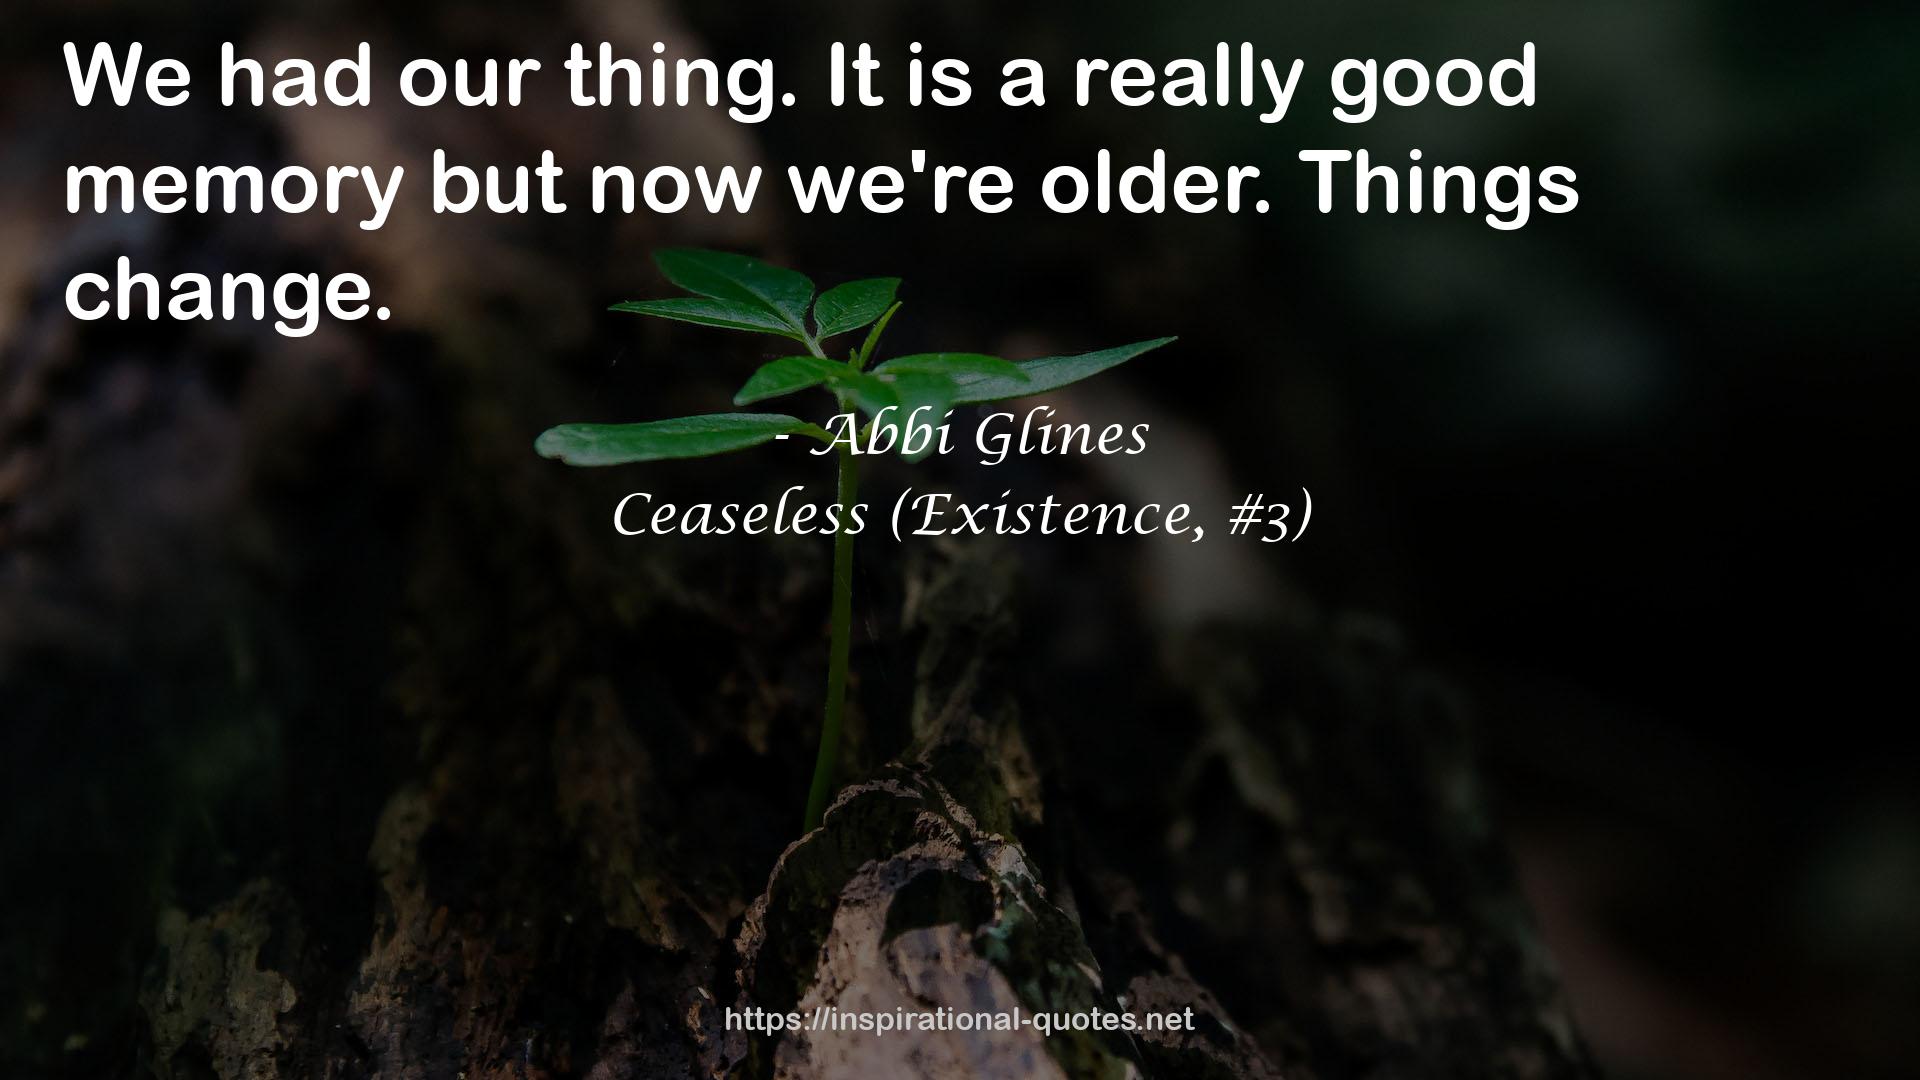 Ceaseless (Existence, #3) QUOTES